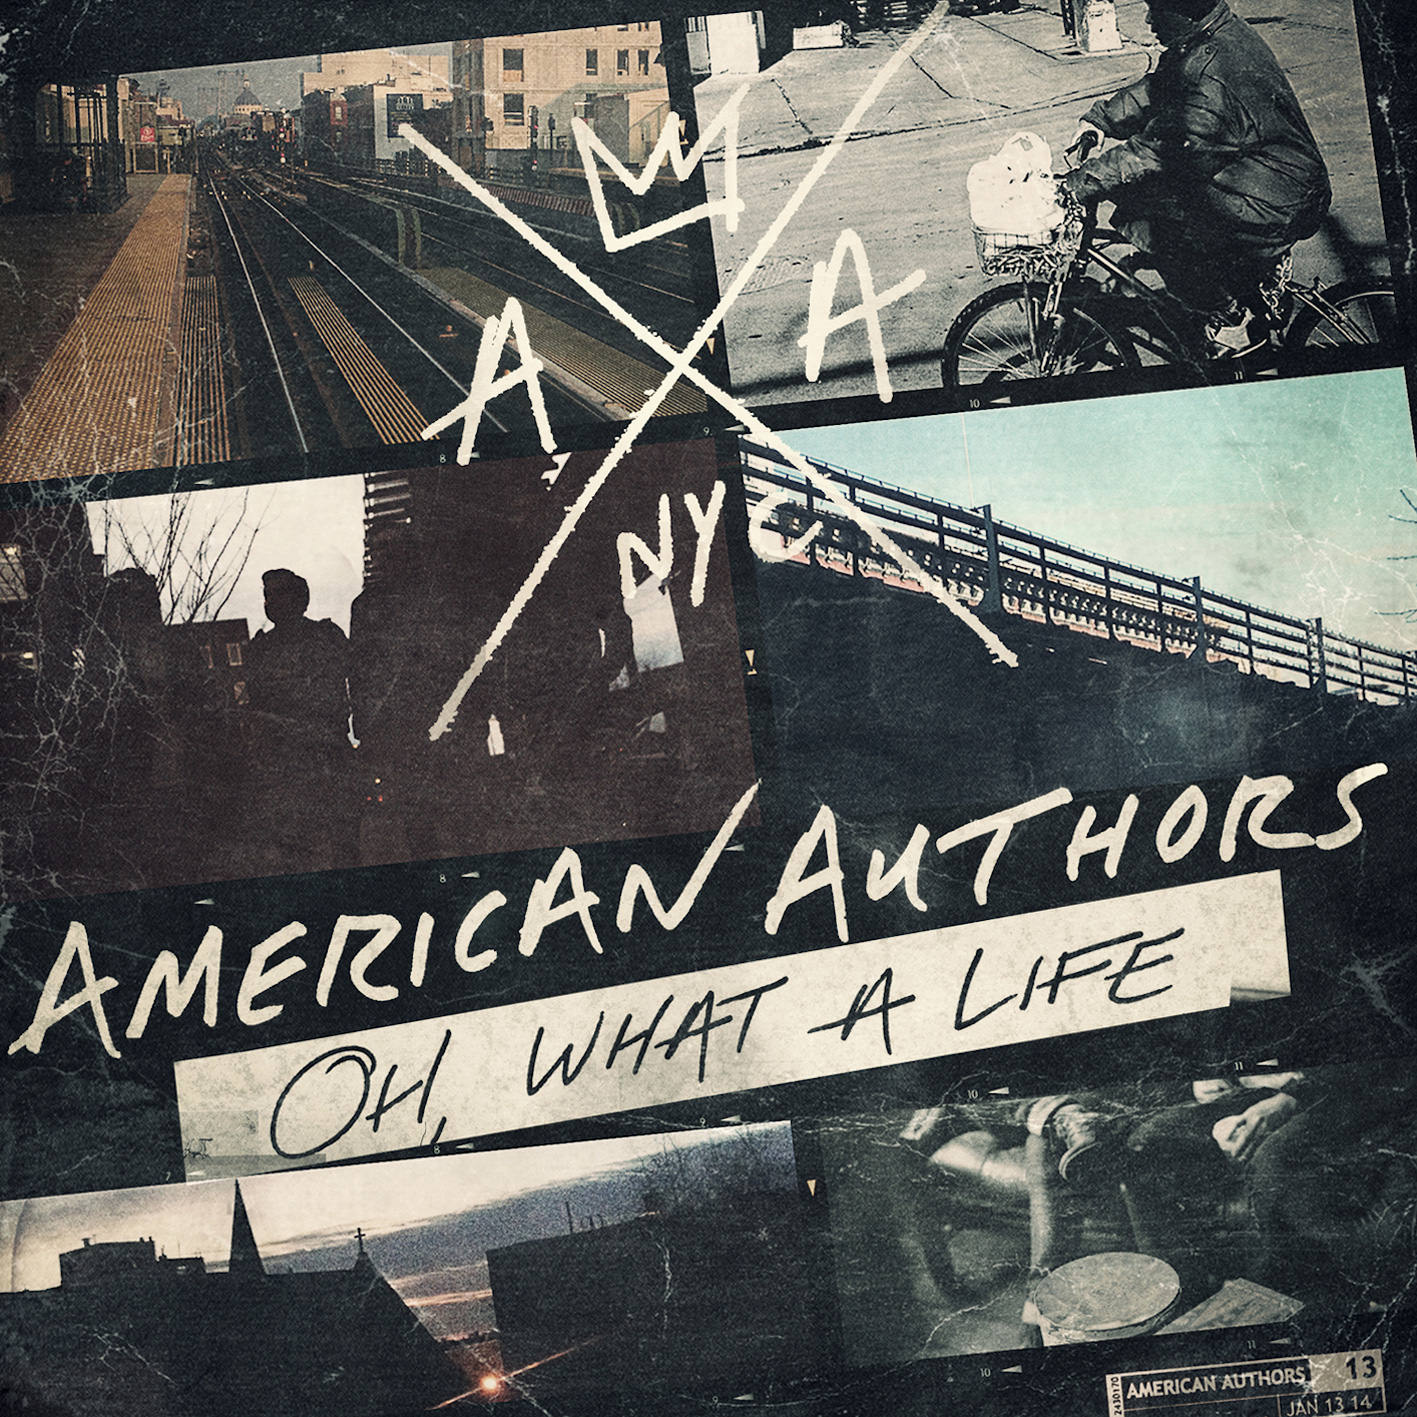 American Authors – Oh, What A Life (2014) [HDTracks FLAC 24bit/44,1kHz]